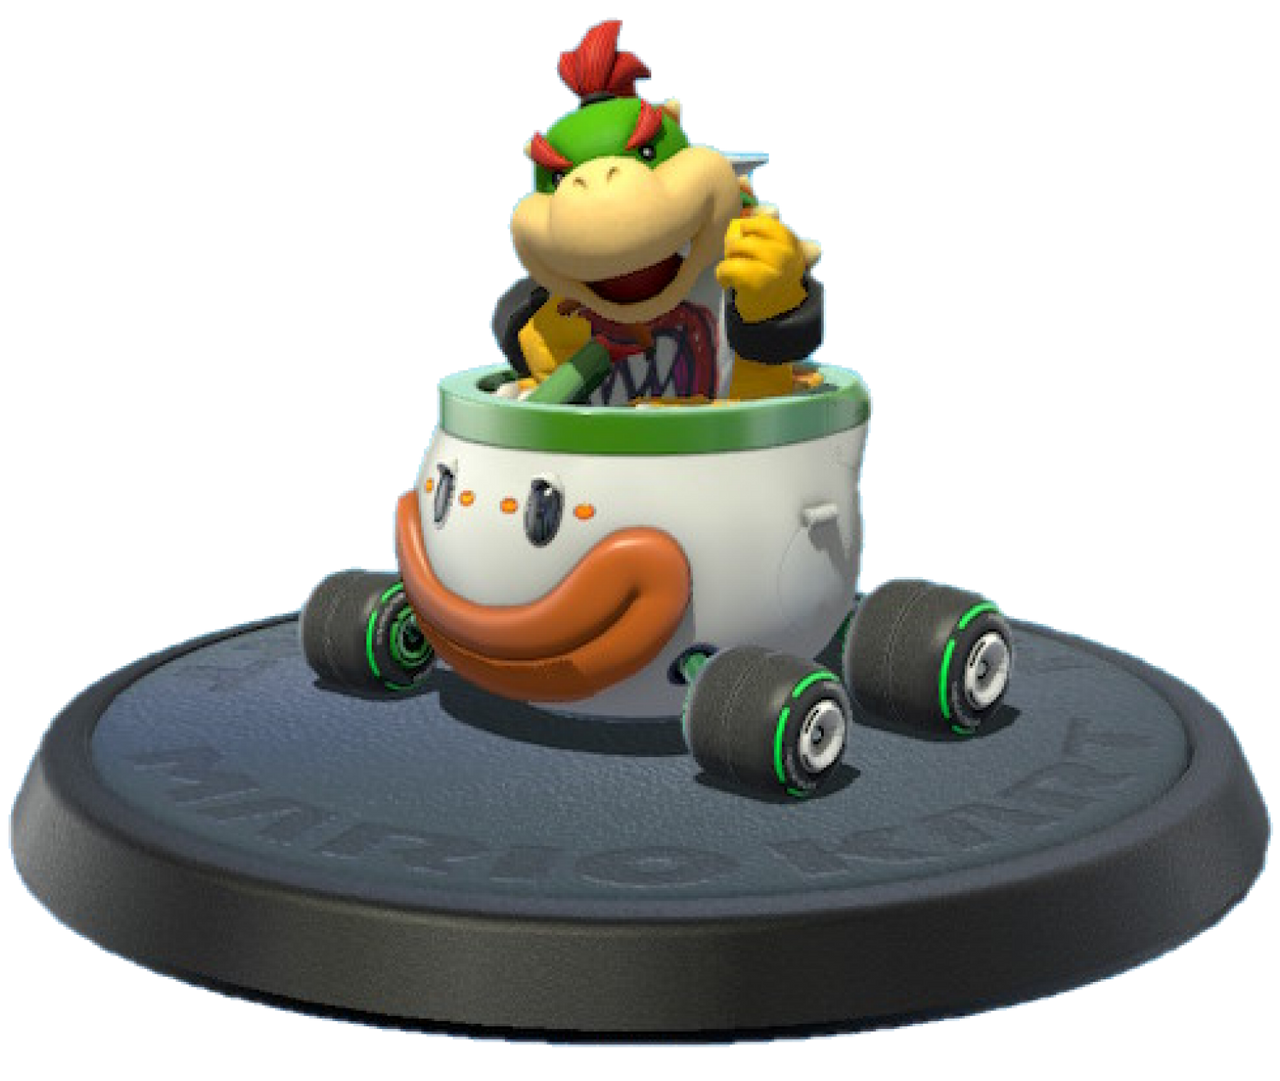 Nintendo Switch - Mario Kart 8 Deluxe - Bowser Jr. - The Models Resource